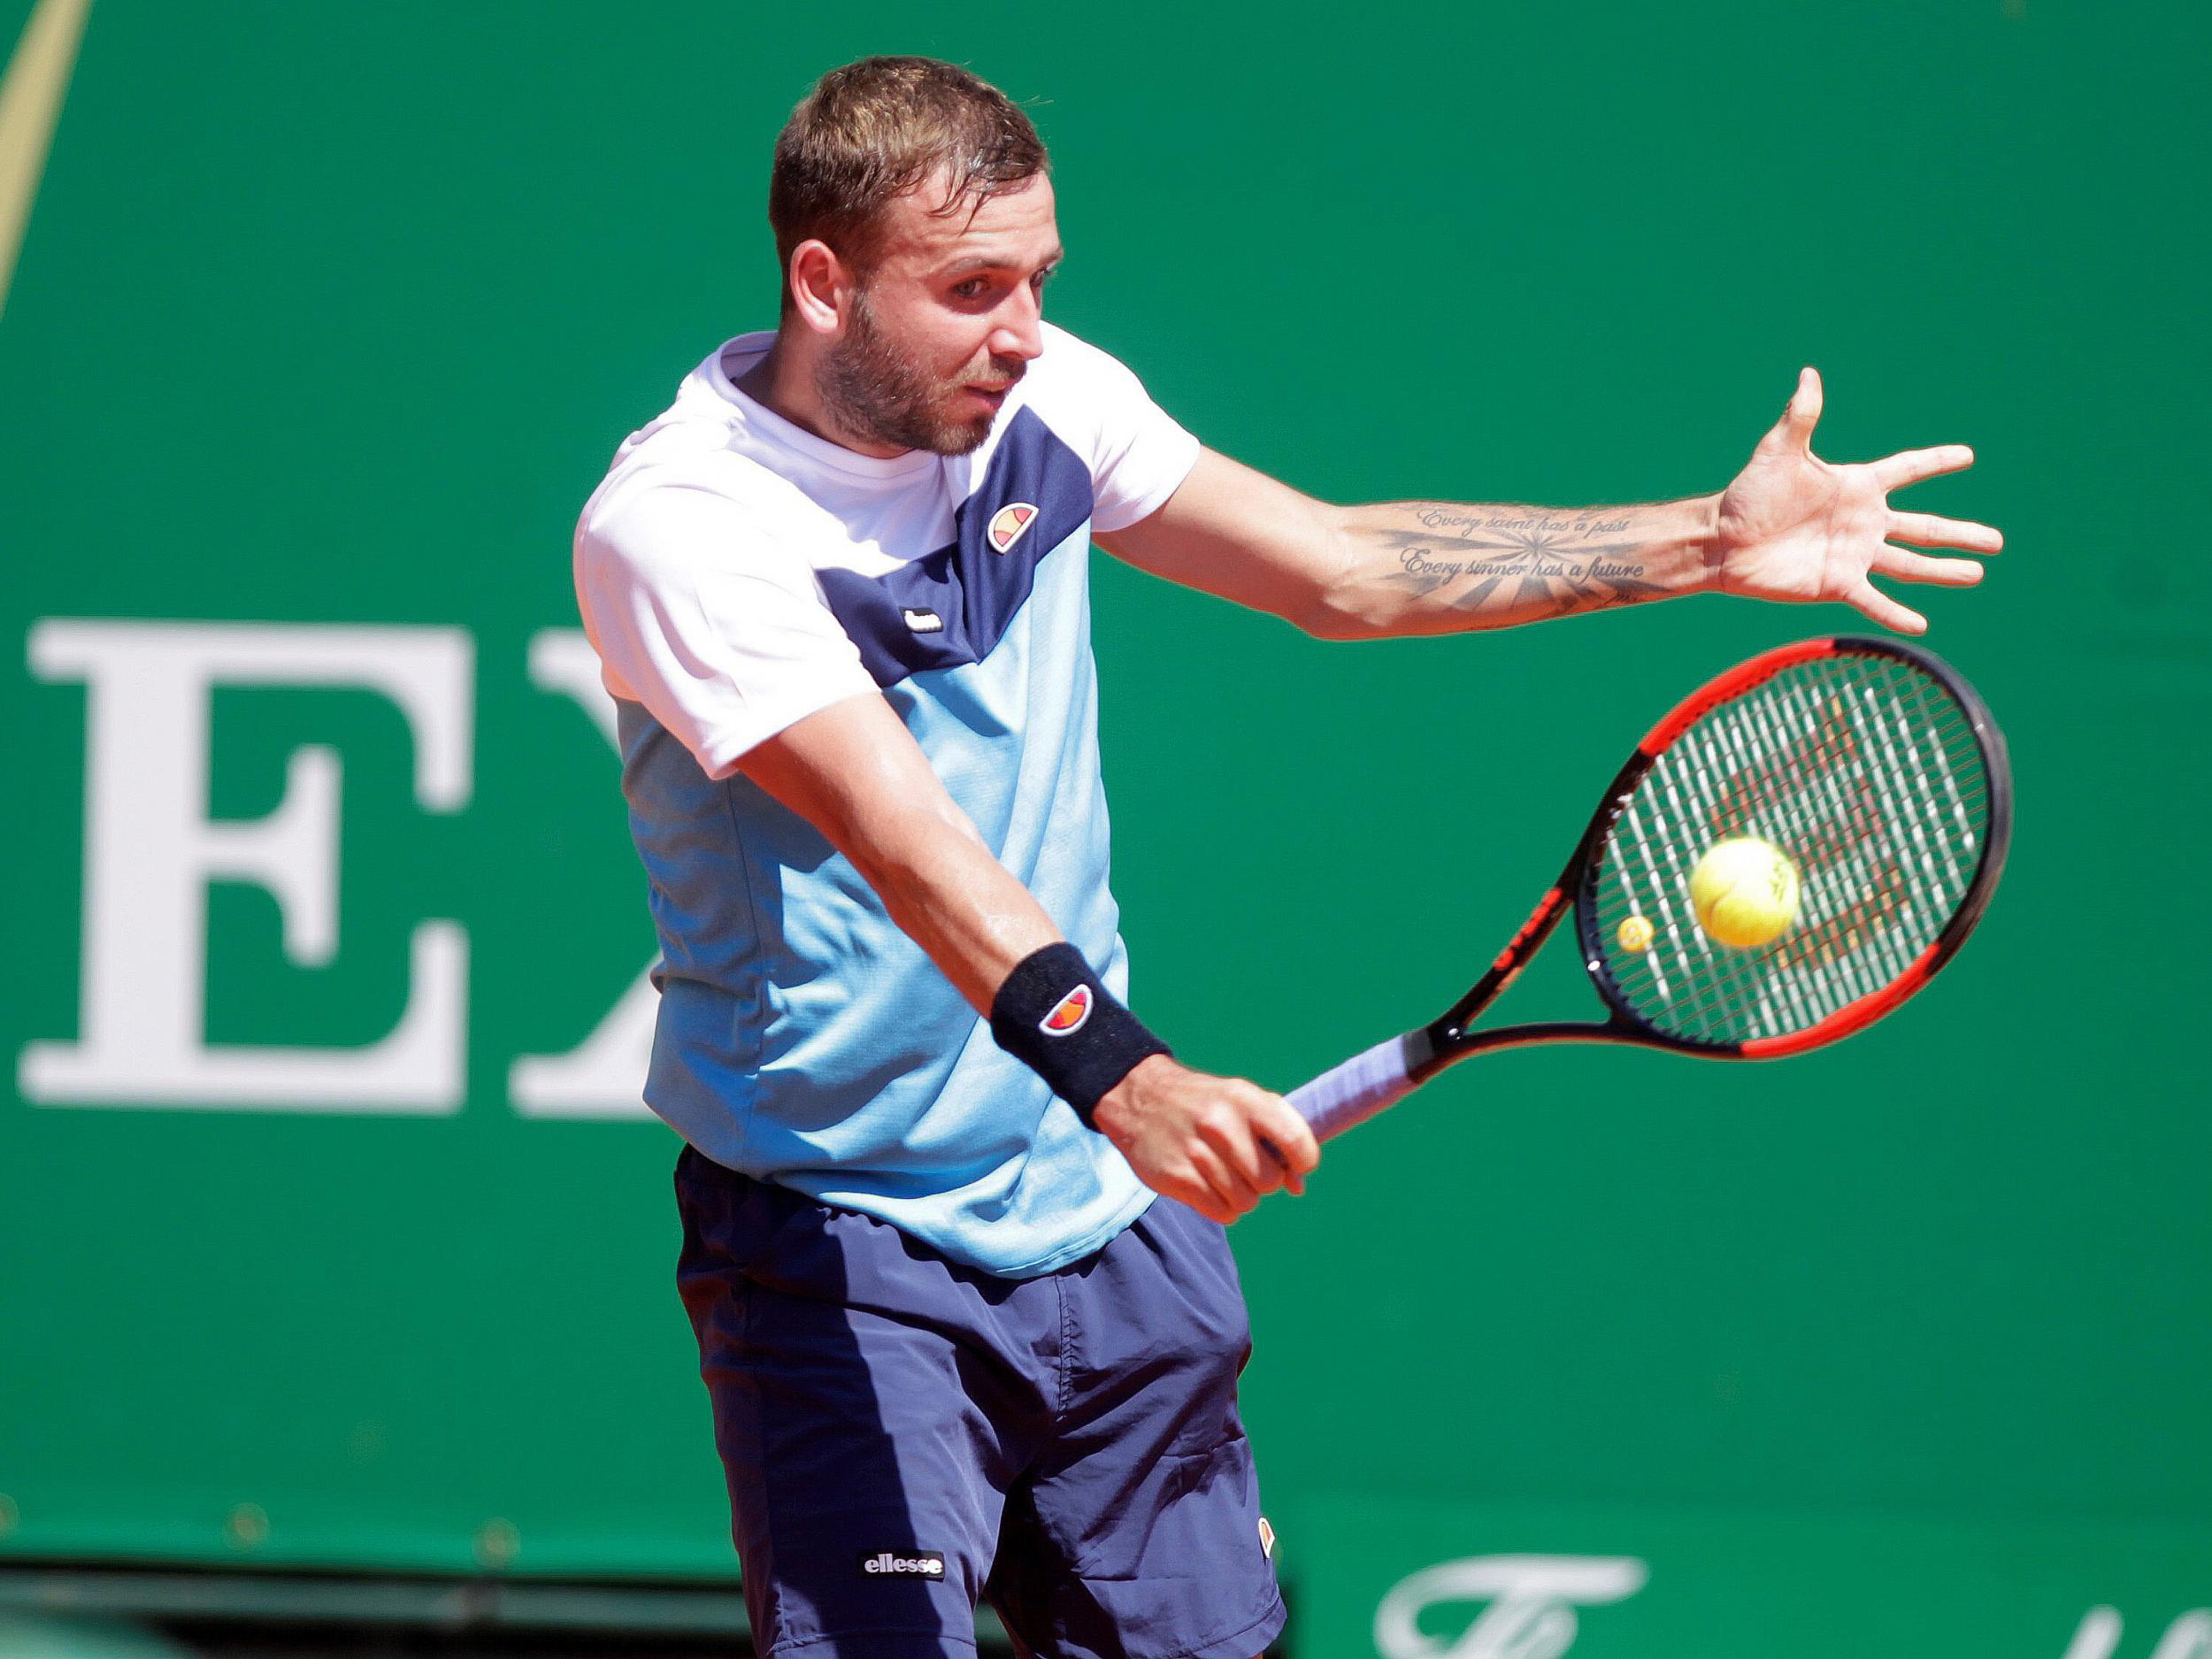 Evans held his nerve to move into the second round of the Barcelona Open